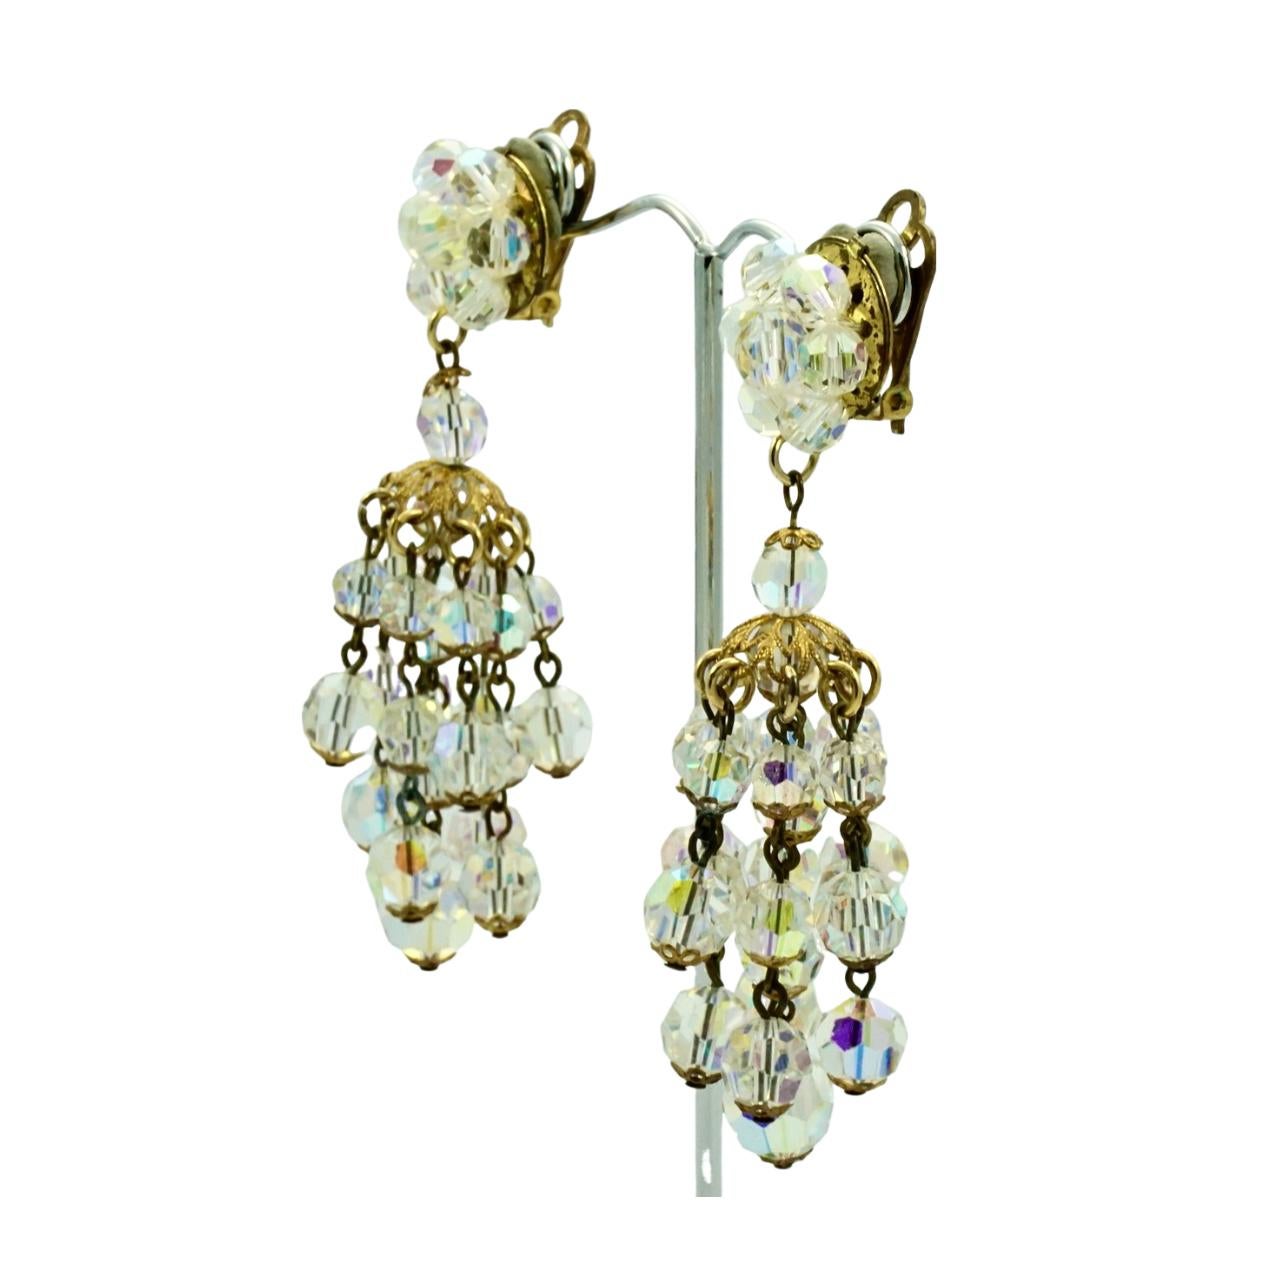 Fabulous gold plated chandelier clip on earrings, featuring nine strands of faceted aurora borealis beads. Each bead is finished with a filligree cap. Measuring length 7.9 cm / 3.1 inches. There is wear to the gold plating. The tops have been